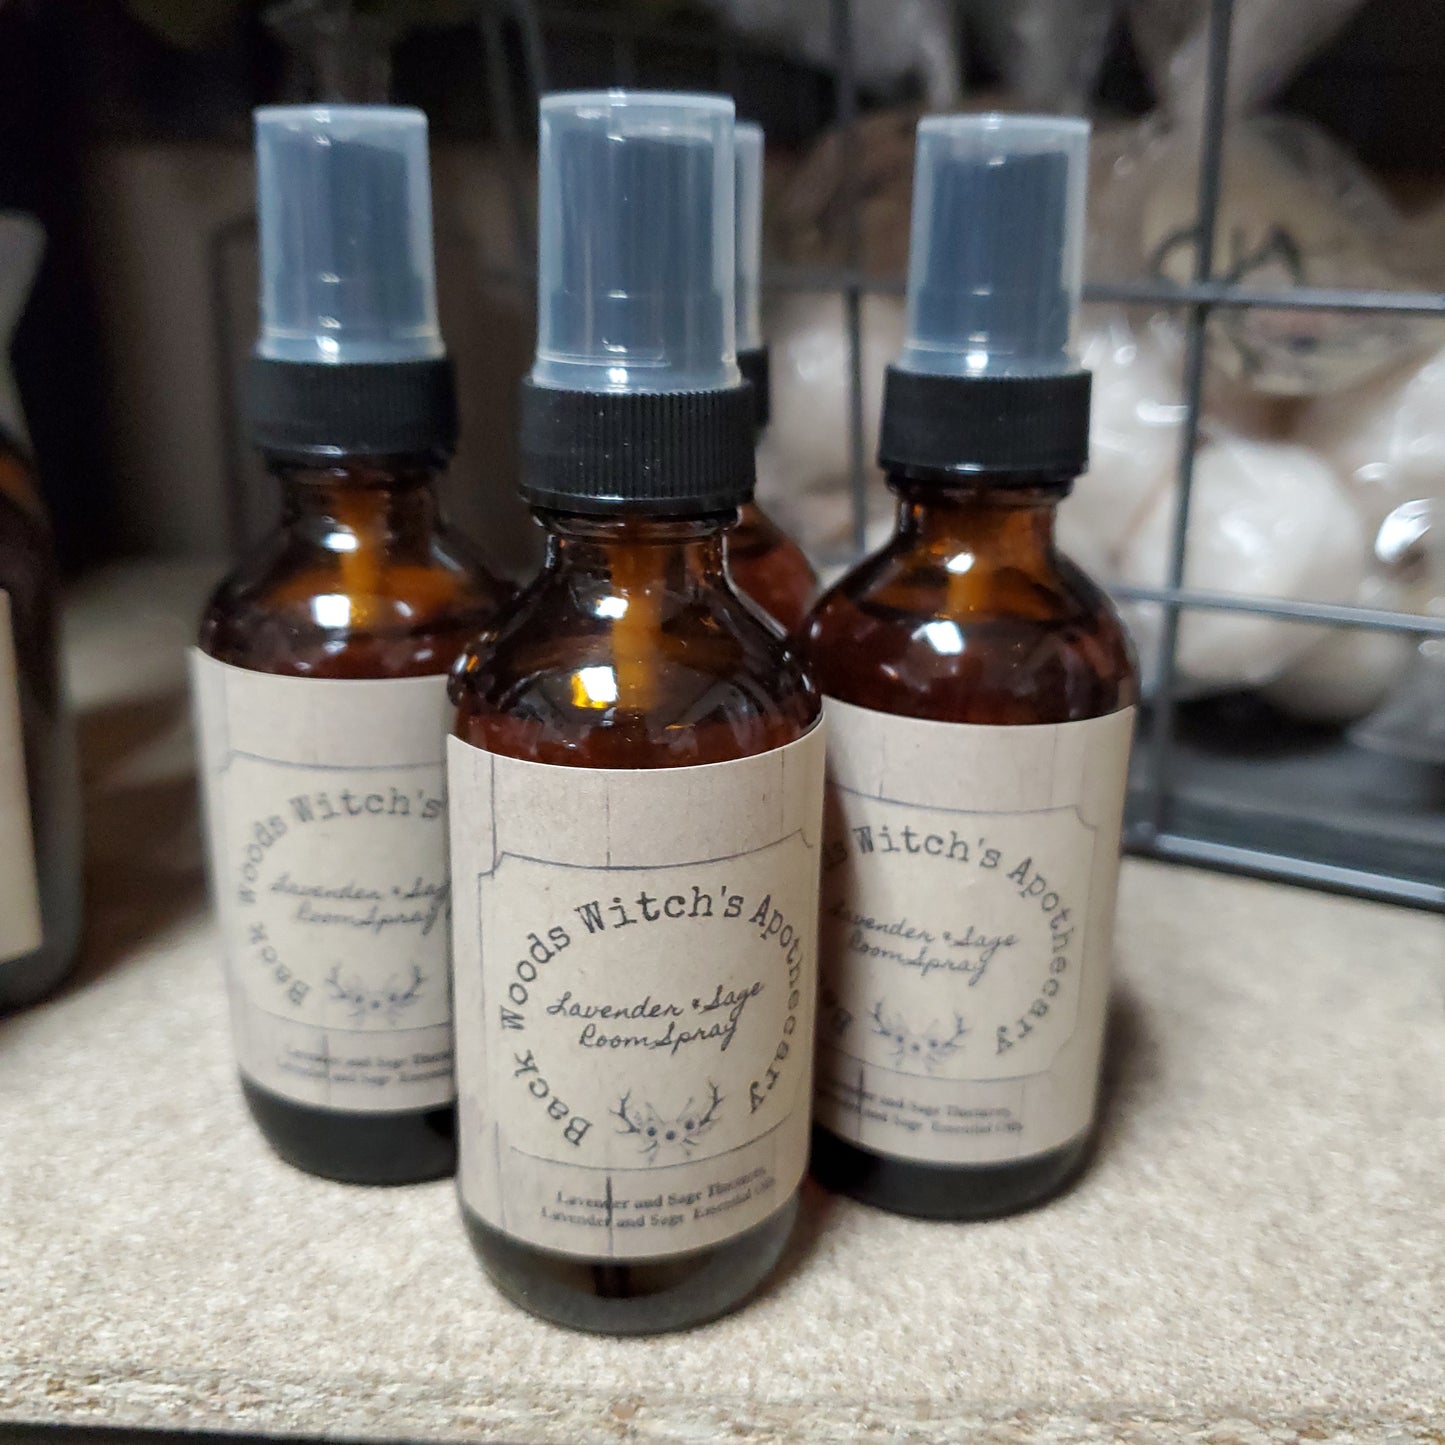 Back Wood Witch’s Apothecary - Room Sprays